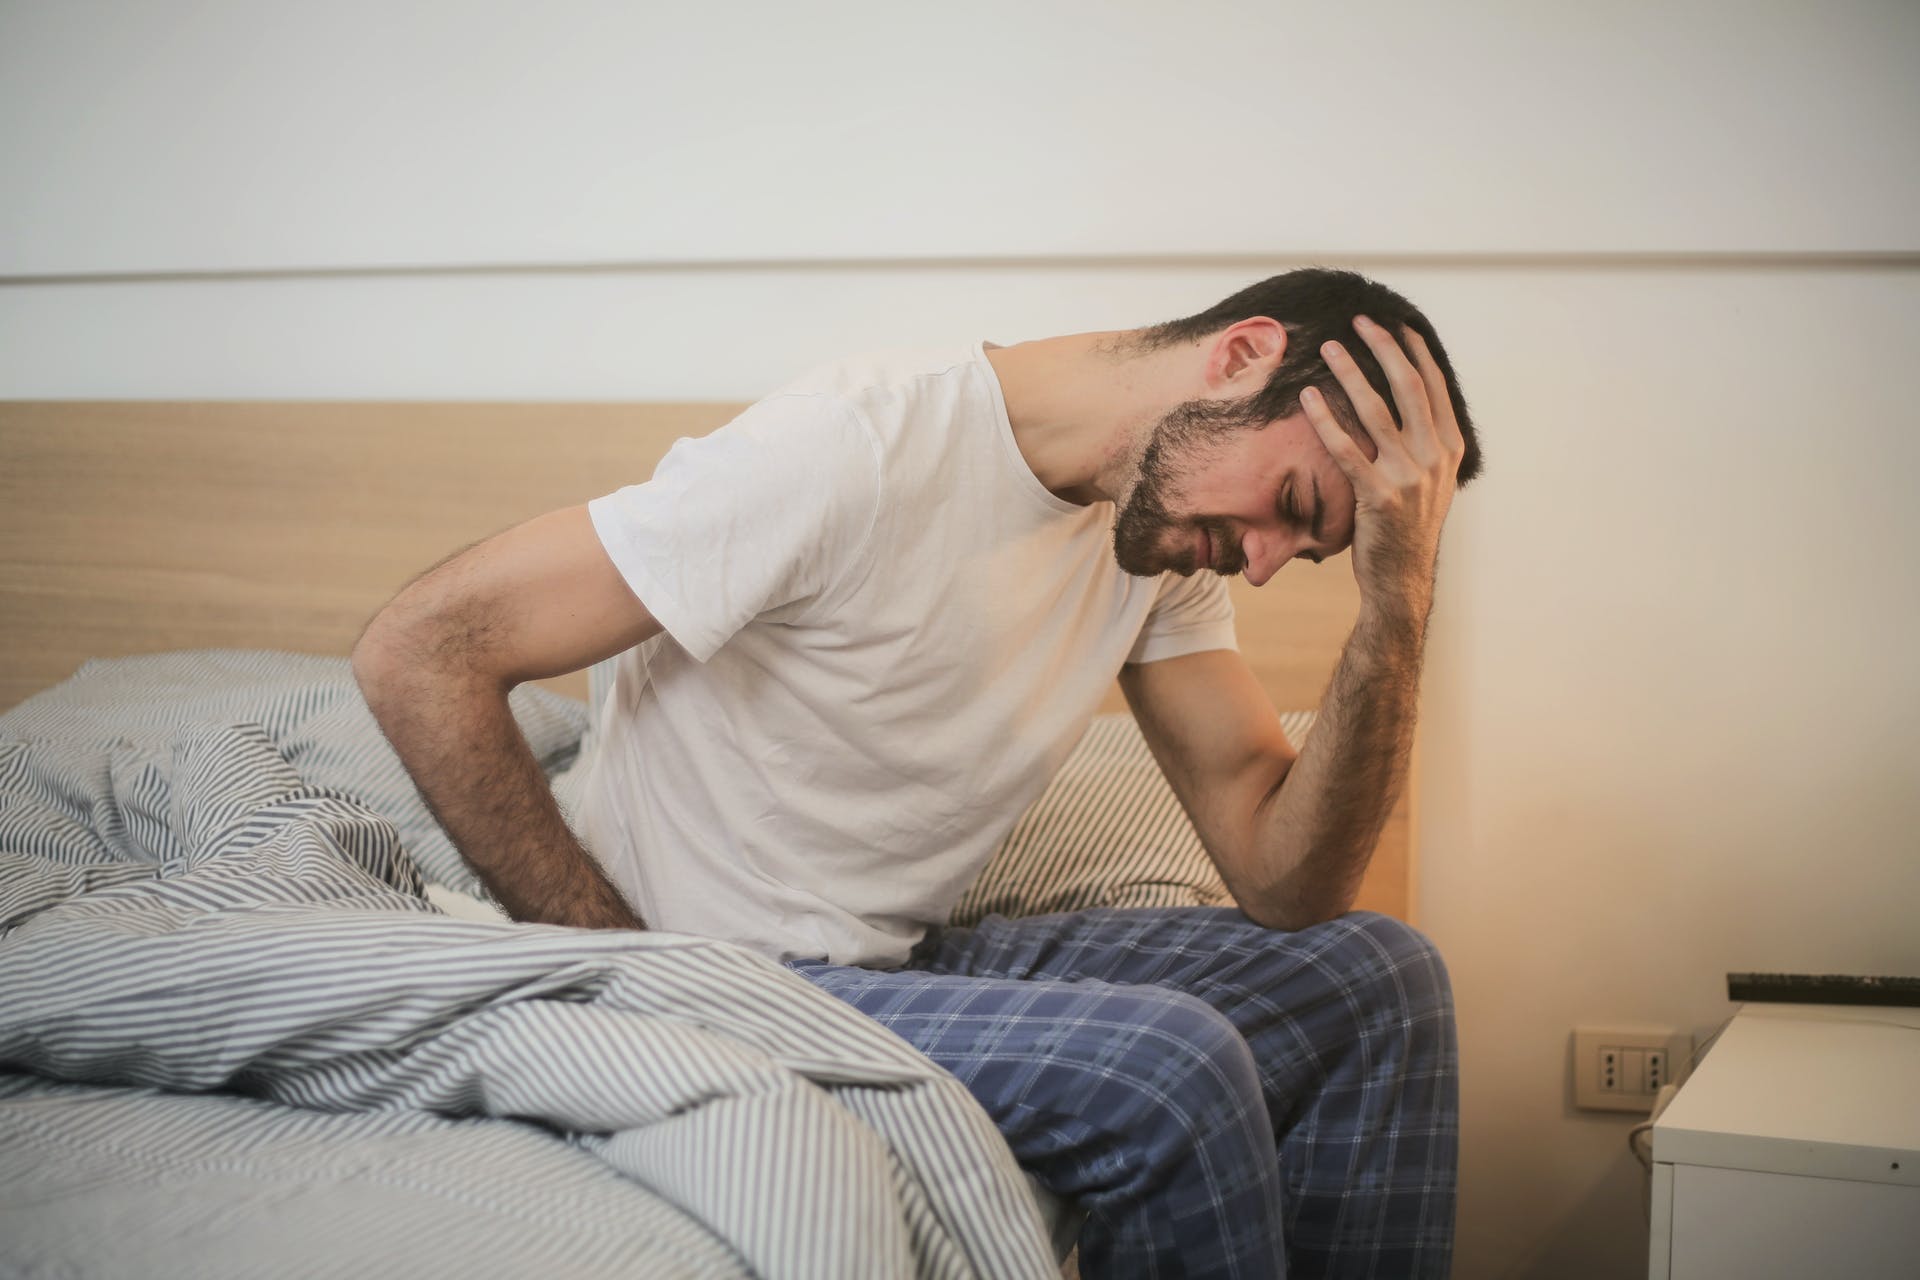 A distressed man sitting on the side of his bed | Source: Pexels